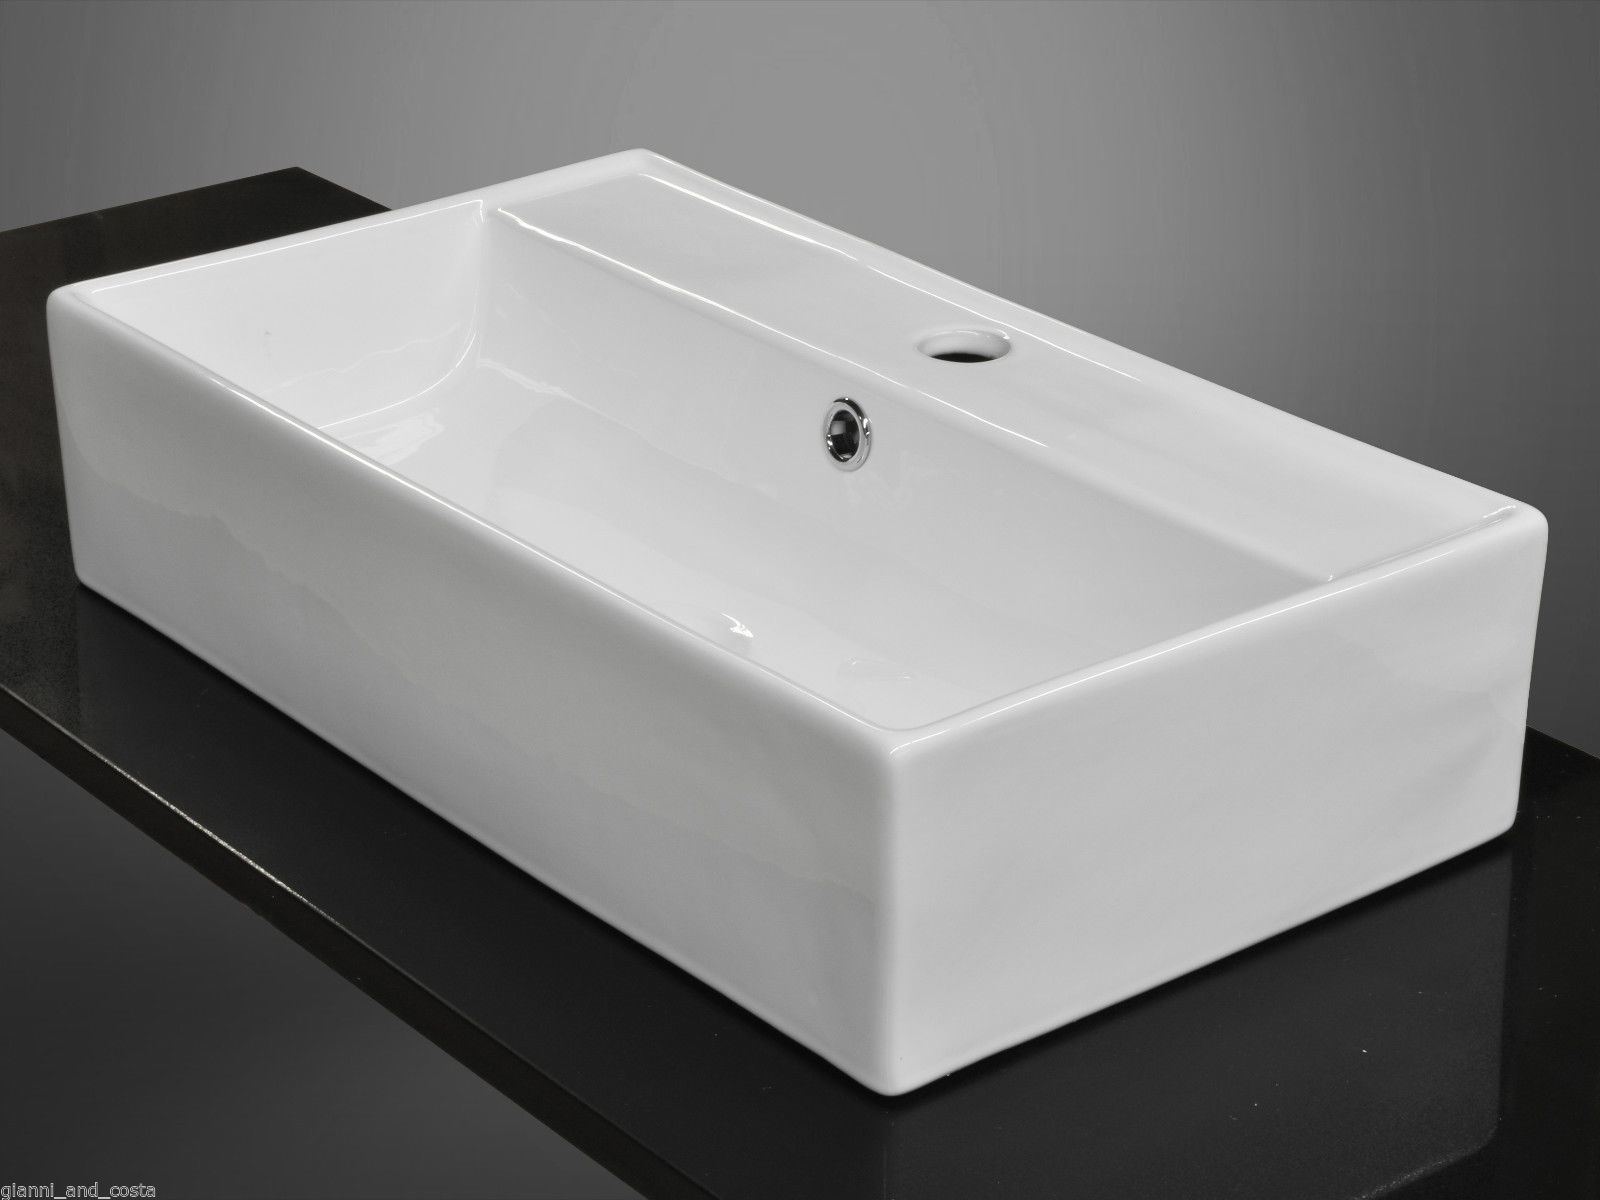  CERAMIC RECTANGULAR ABOVE COUNTER TOP BASIN INCLUDES POP-UP WASTE